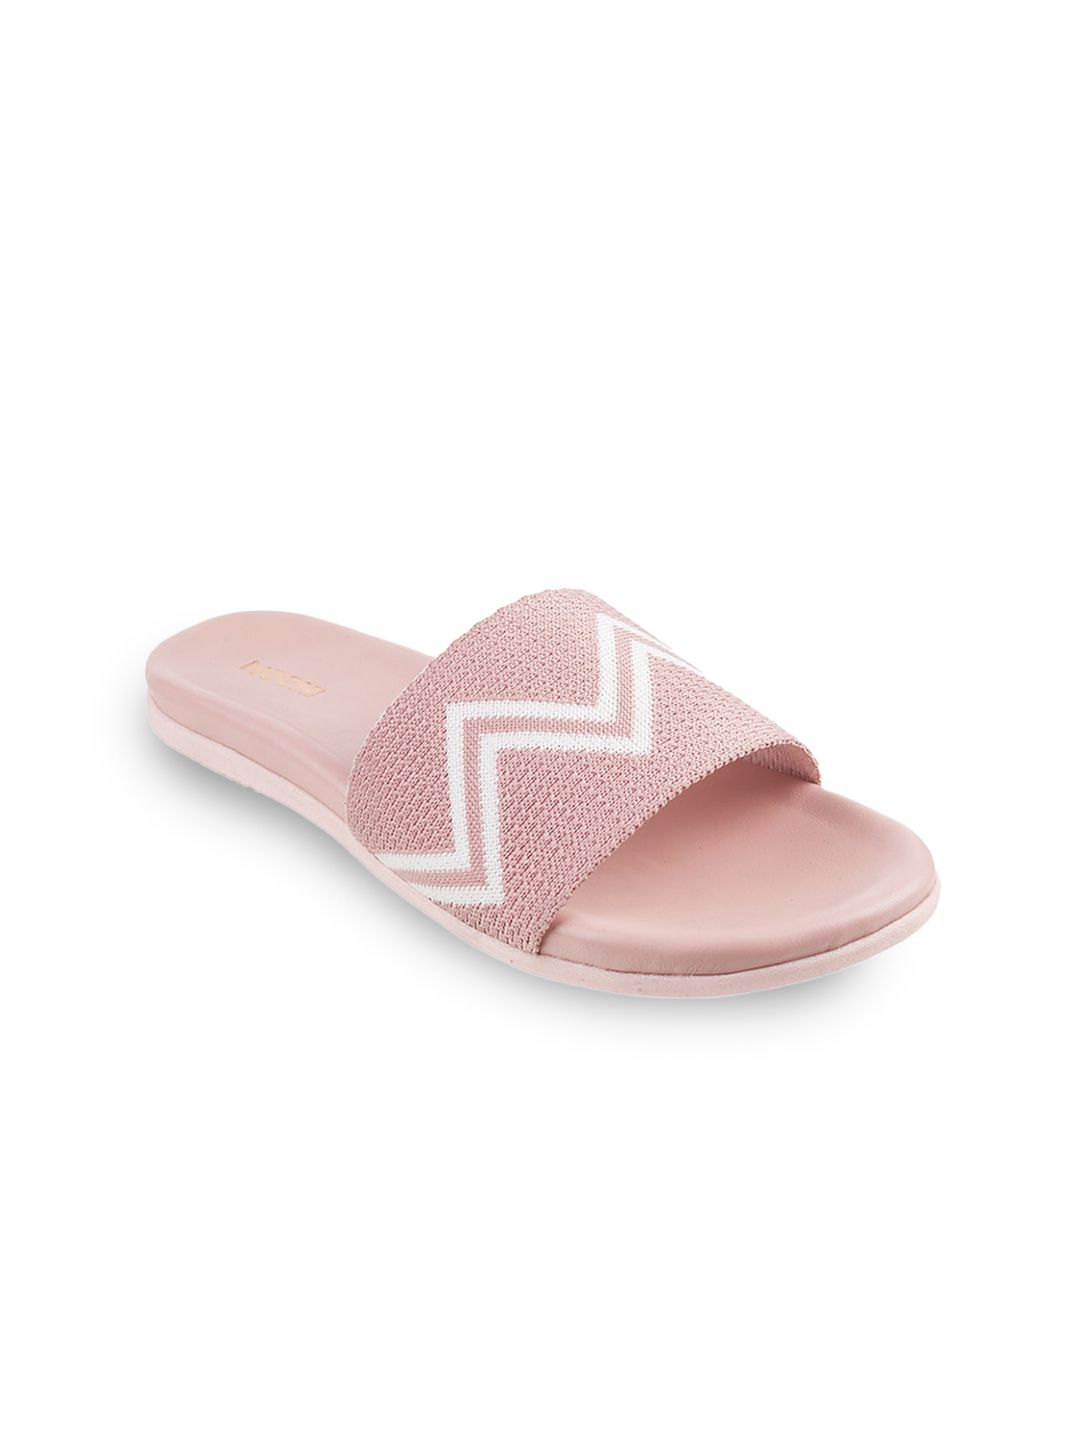 Mochi Women Pink Printed Rubber Sliders Price in India